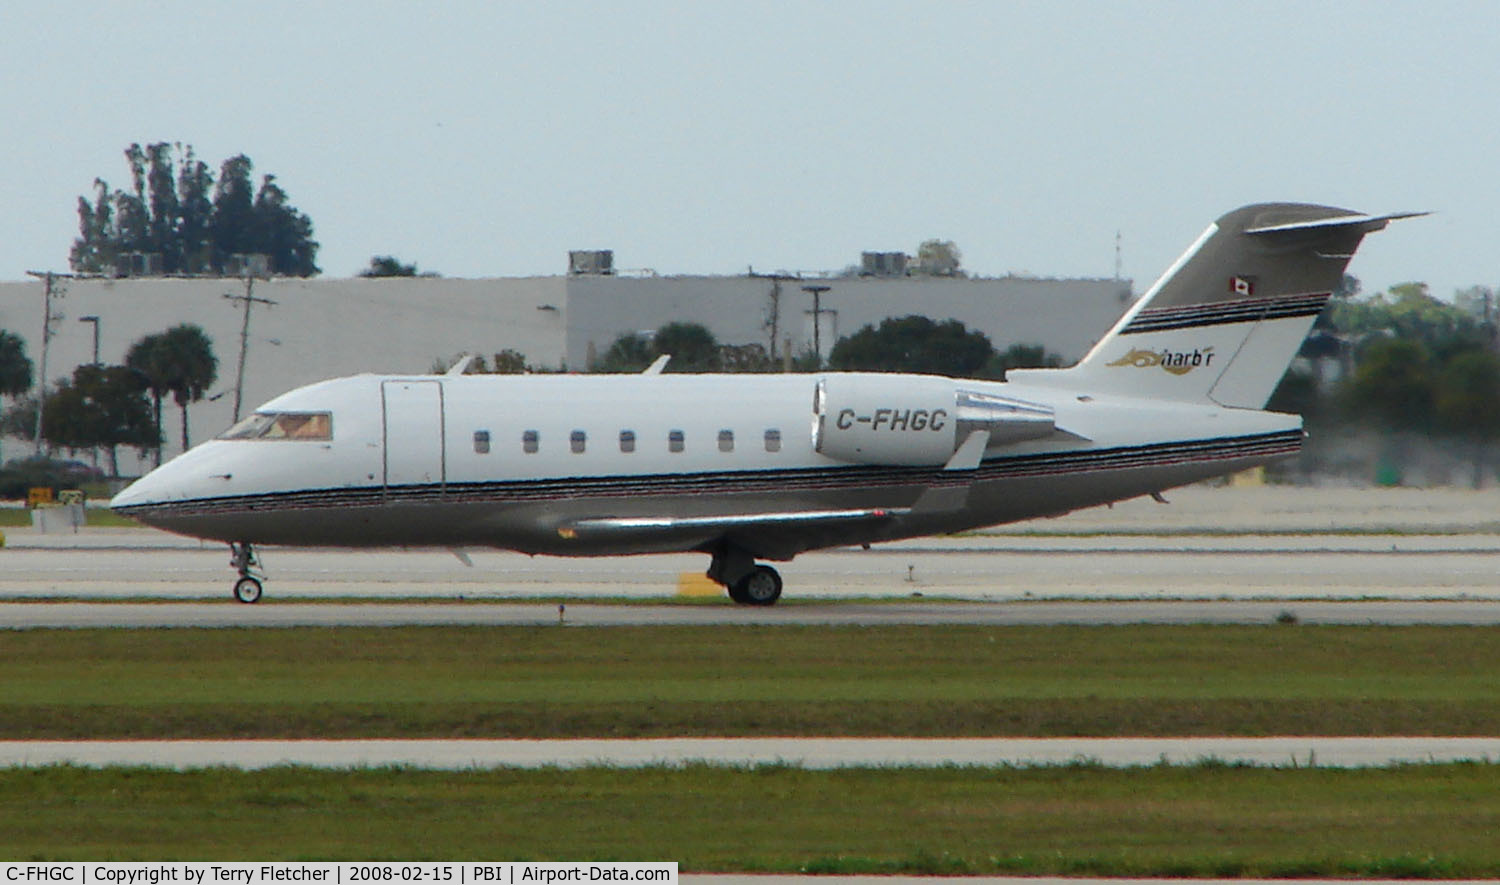 C-FHGC, Canadair Challenger 604 (CL-600-2B16) C/N 5453, The business aircraft traffic at West Palm Beach on the Friday before President's Day always provides the aviation enthusiast / photographer with a treat